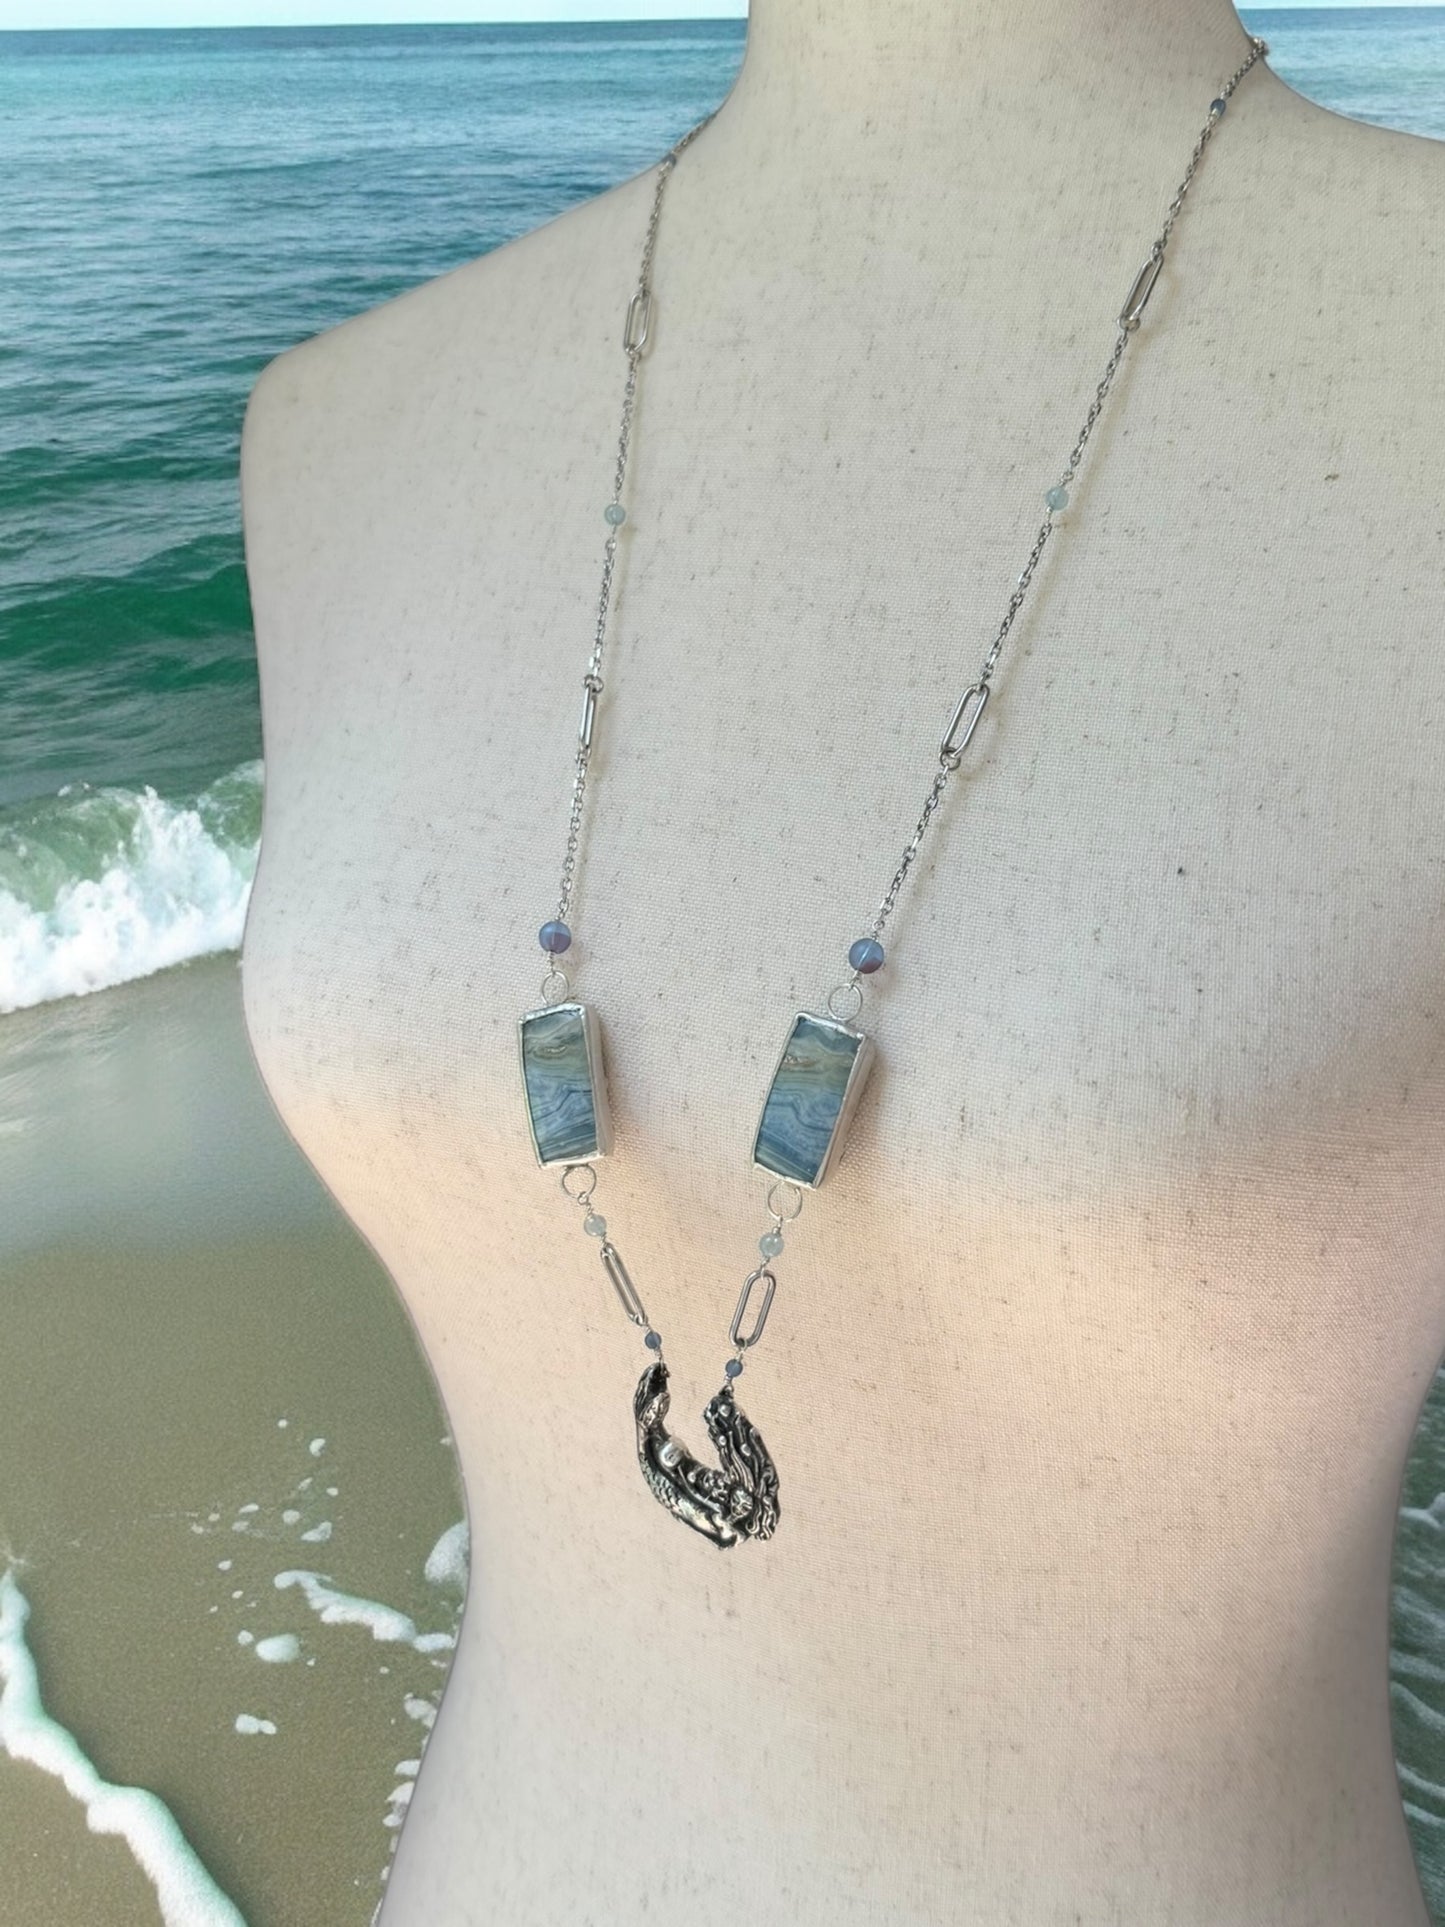 Silver Mermaid, Aquamarine, and Opalized Wood Necklace ￼